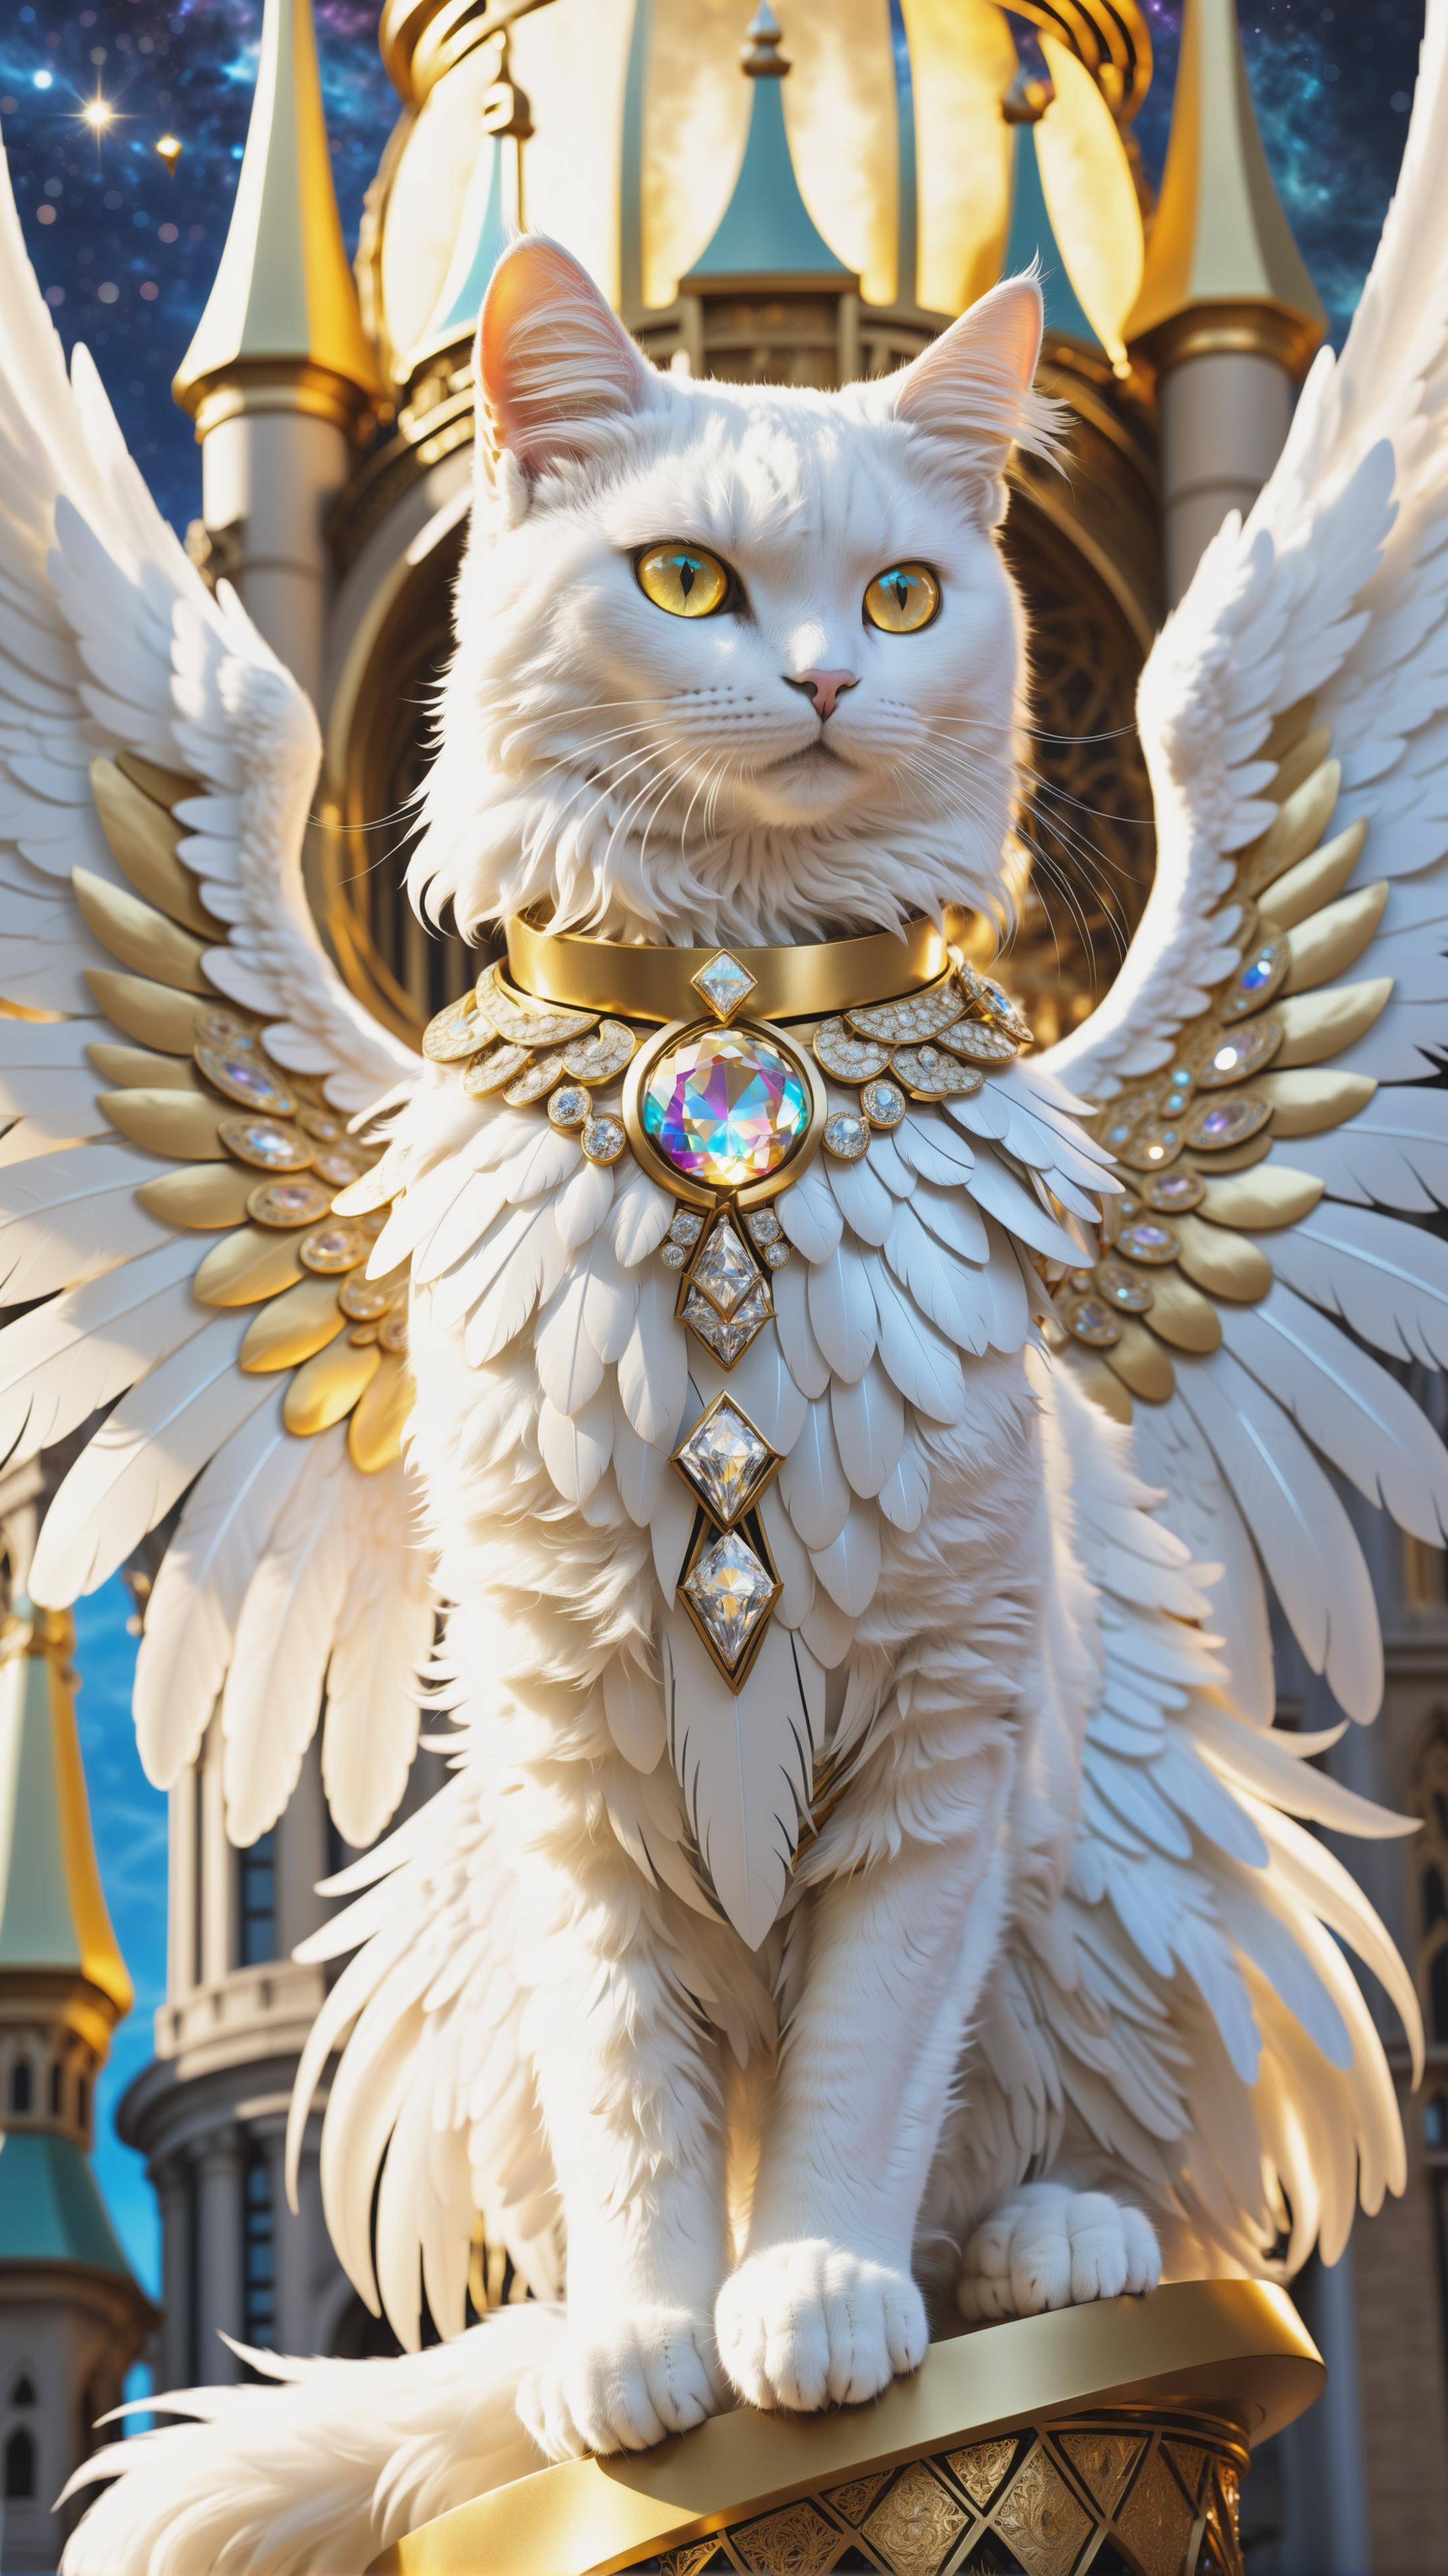 A white, gold, and jewel-adorned cat statue with wings and a halo.